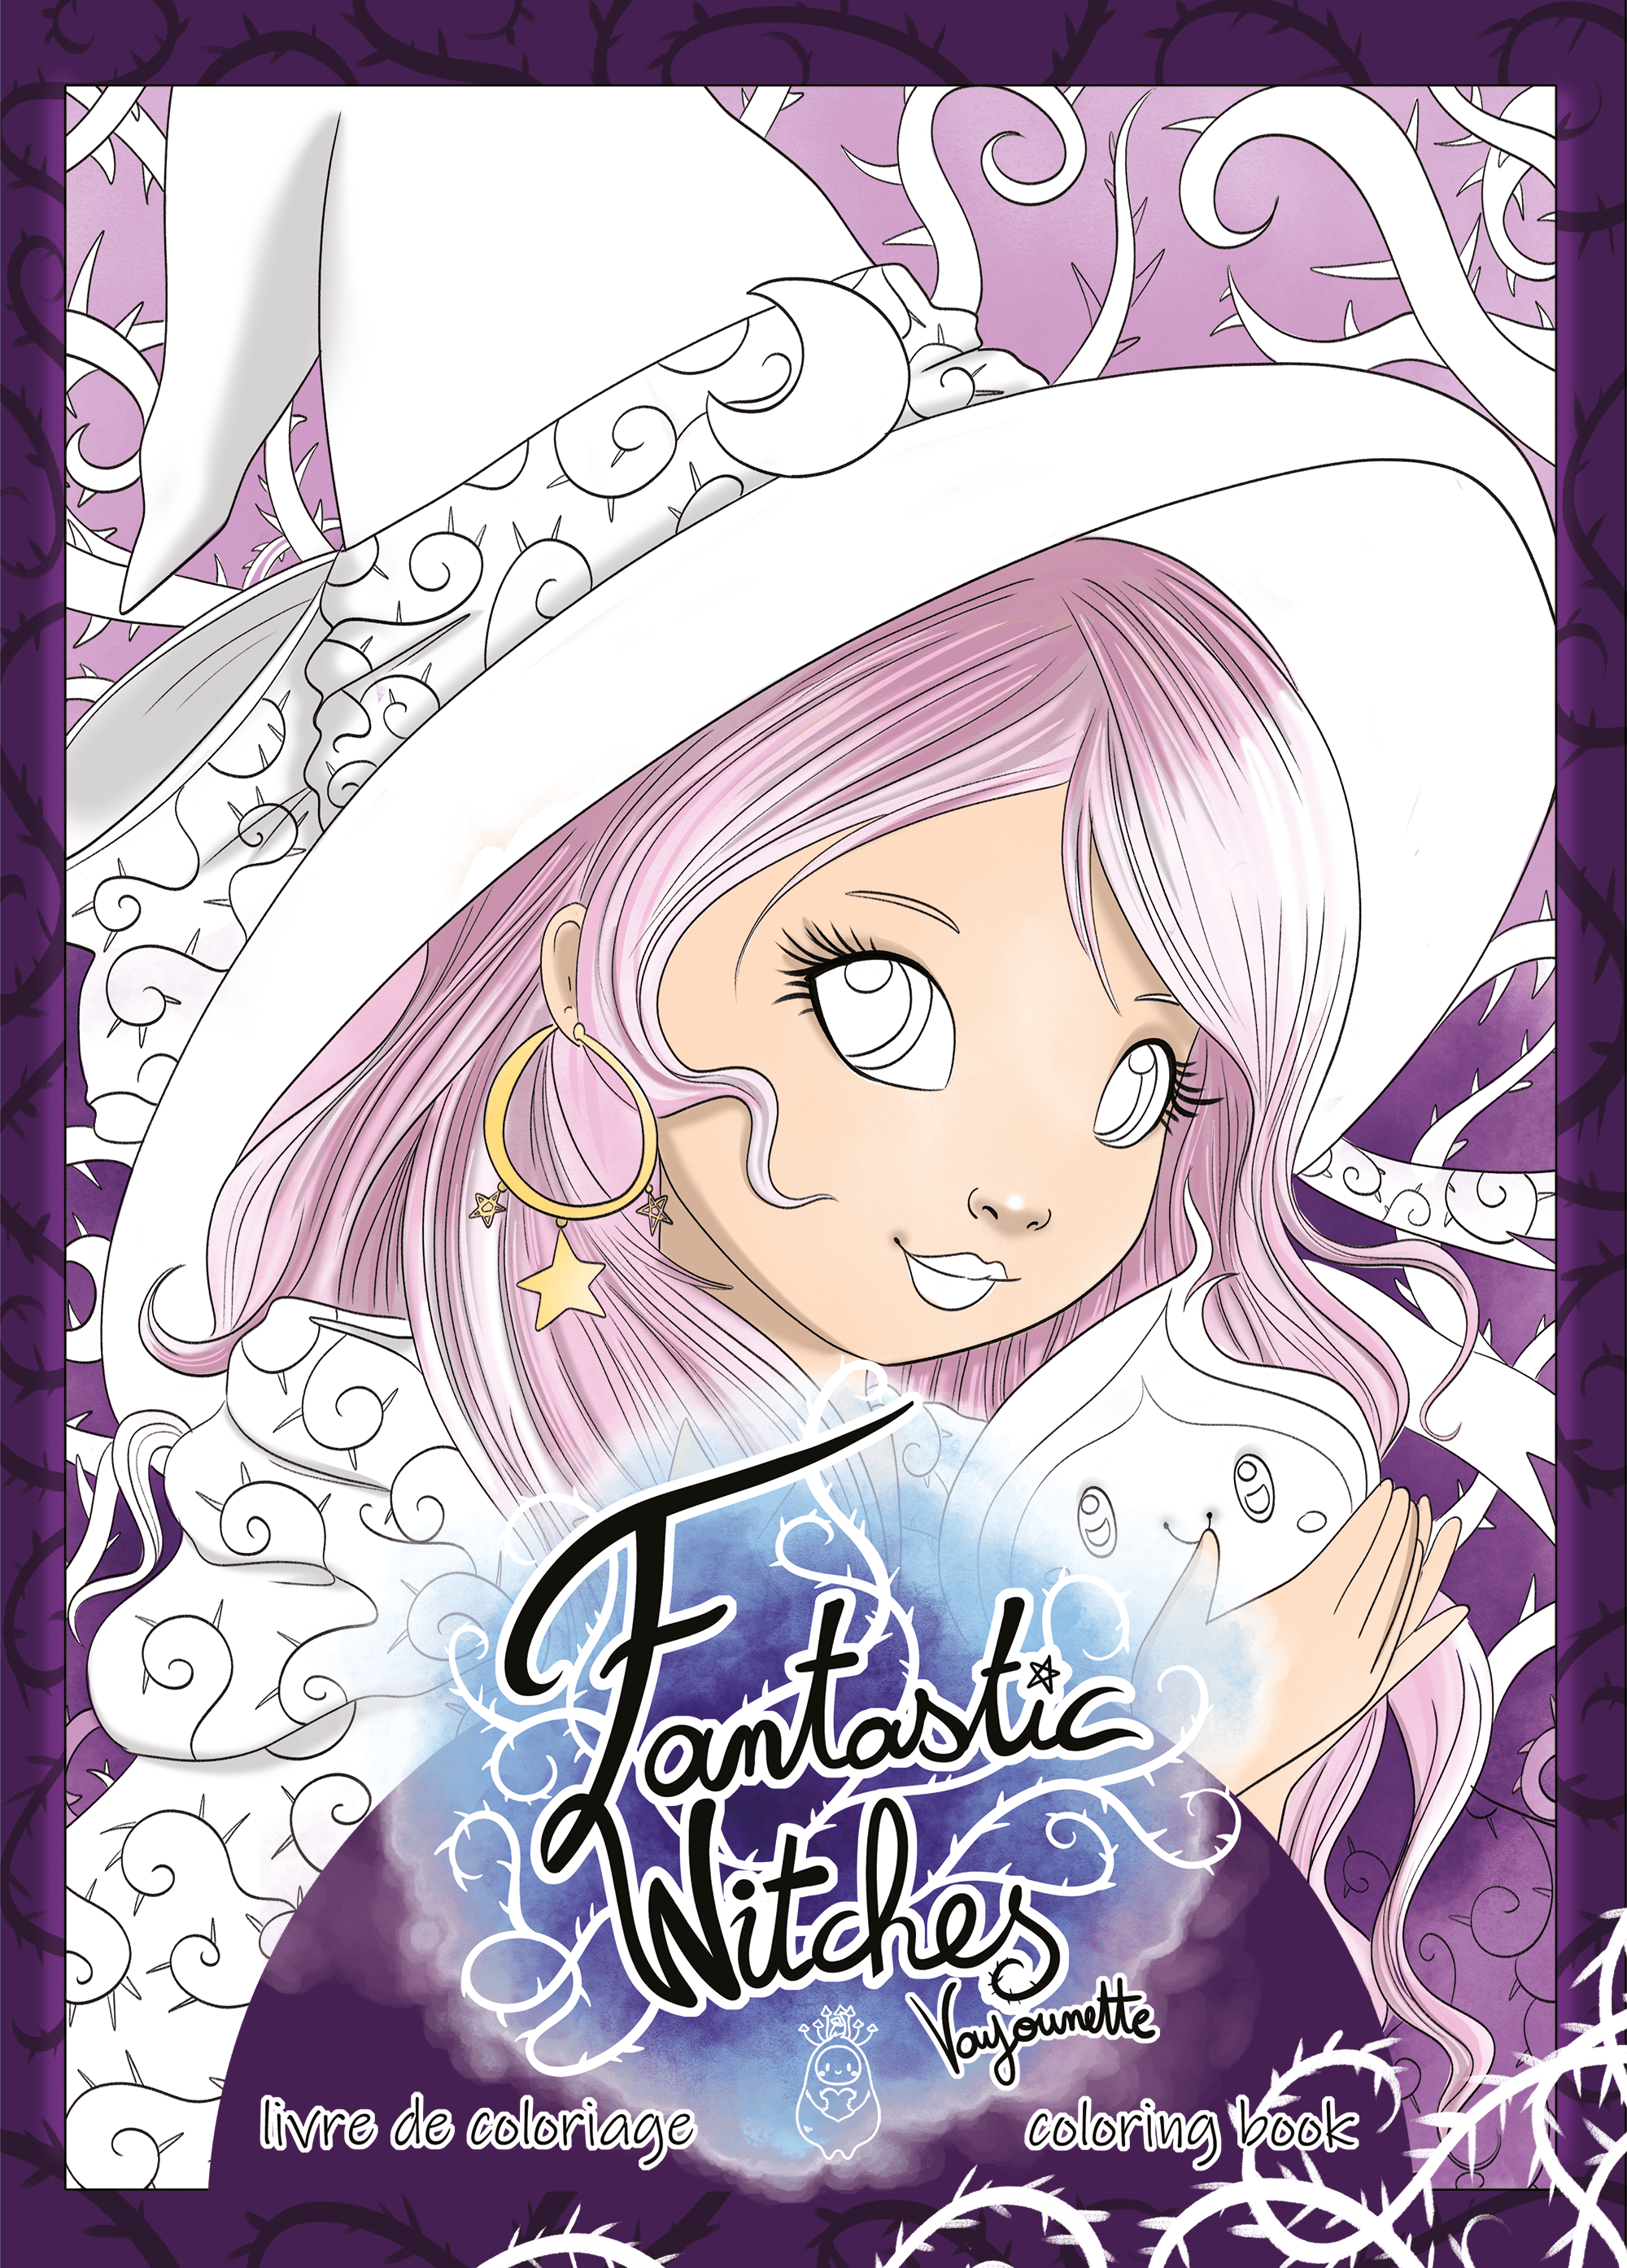 Vayounette Fantastic Witches coloring book Oraloa.